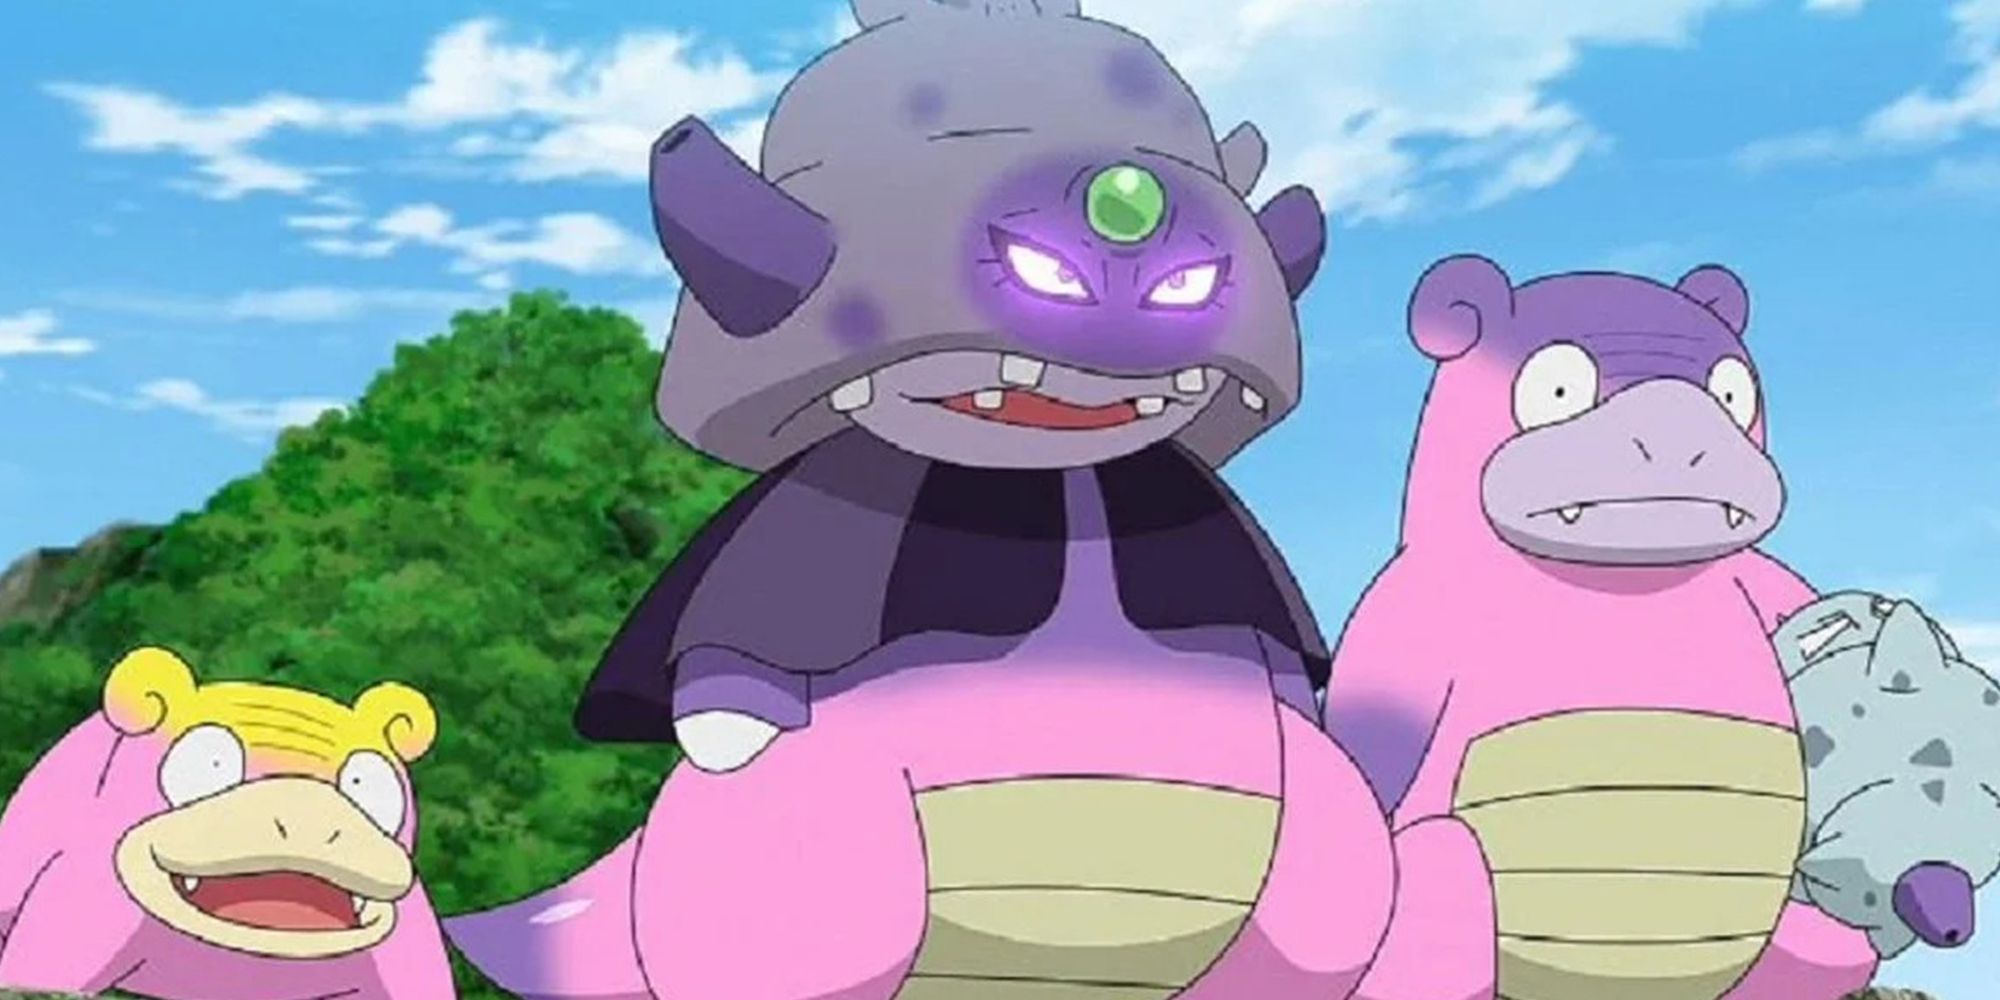 Galarian Slowking and Slowbro In The Pokemon Anime